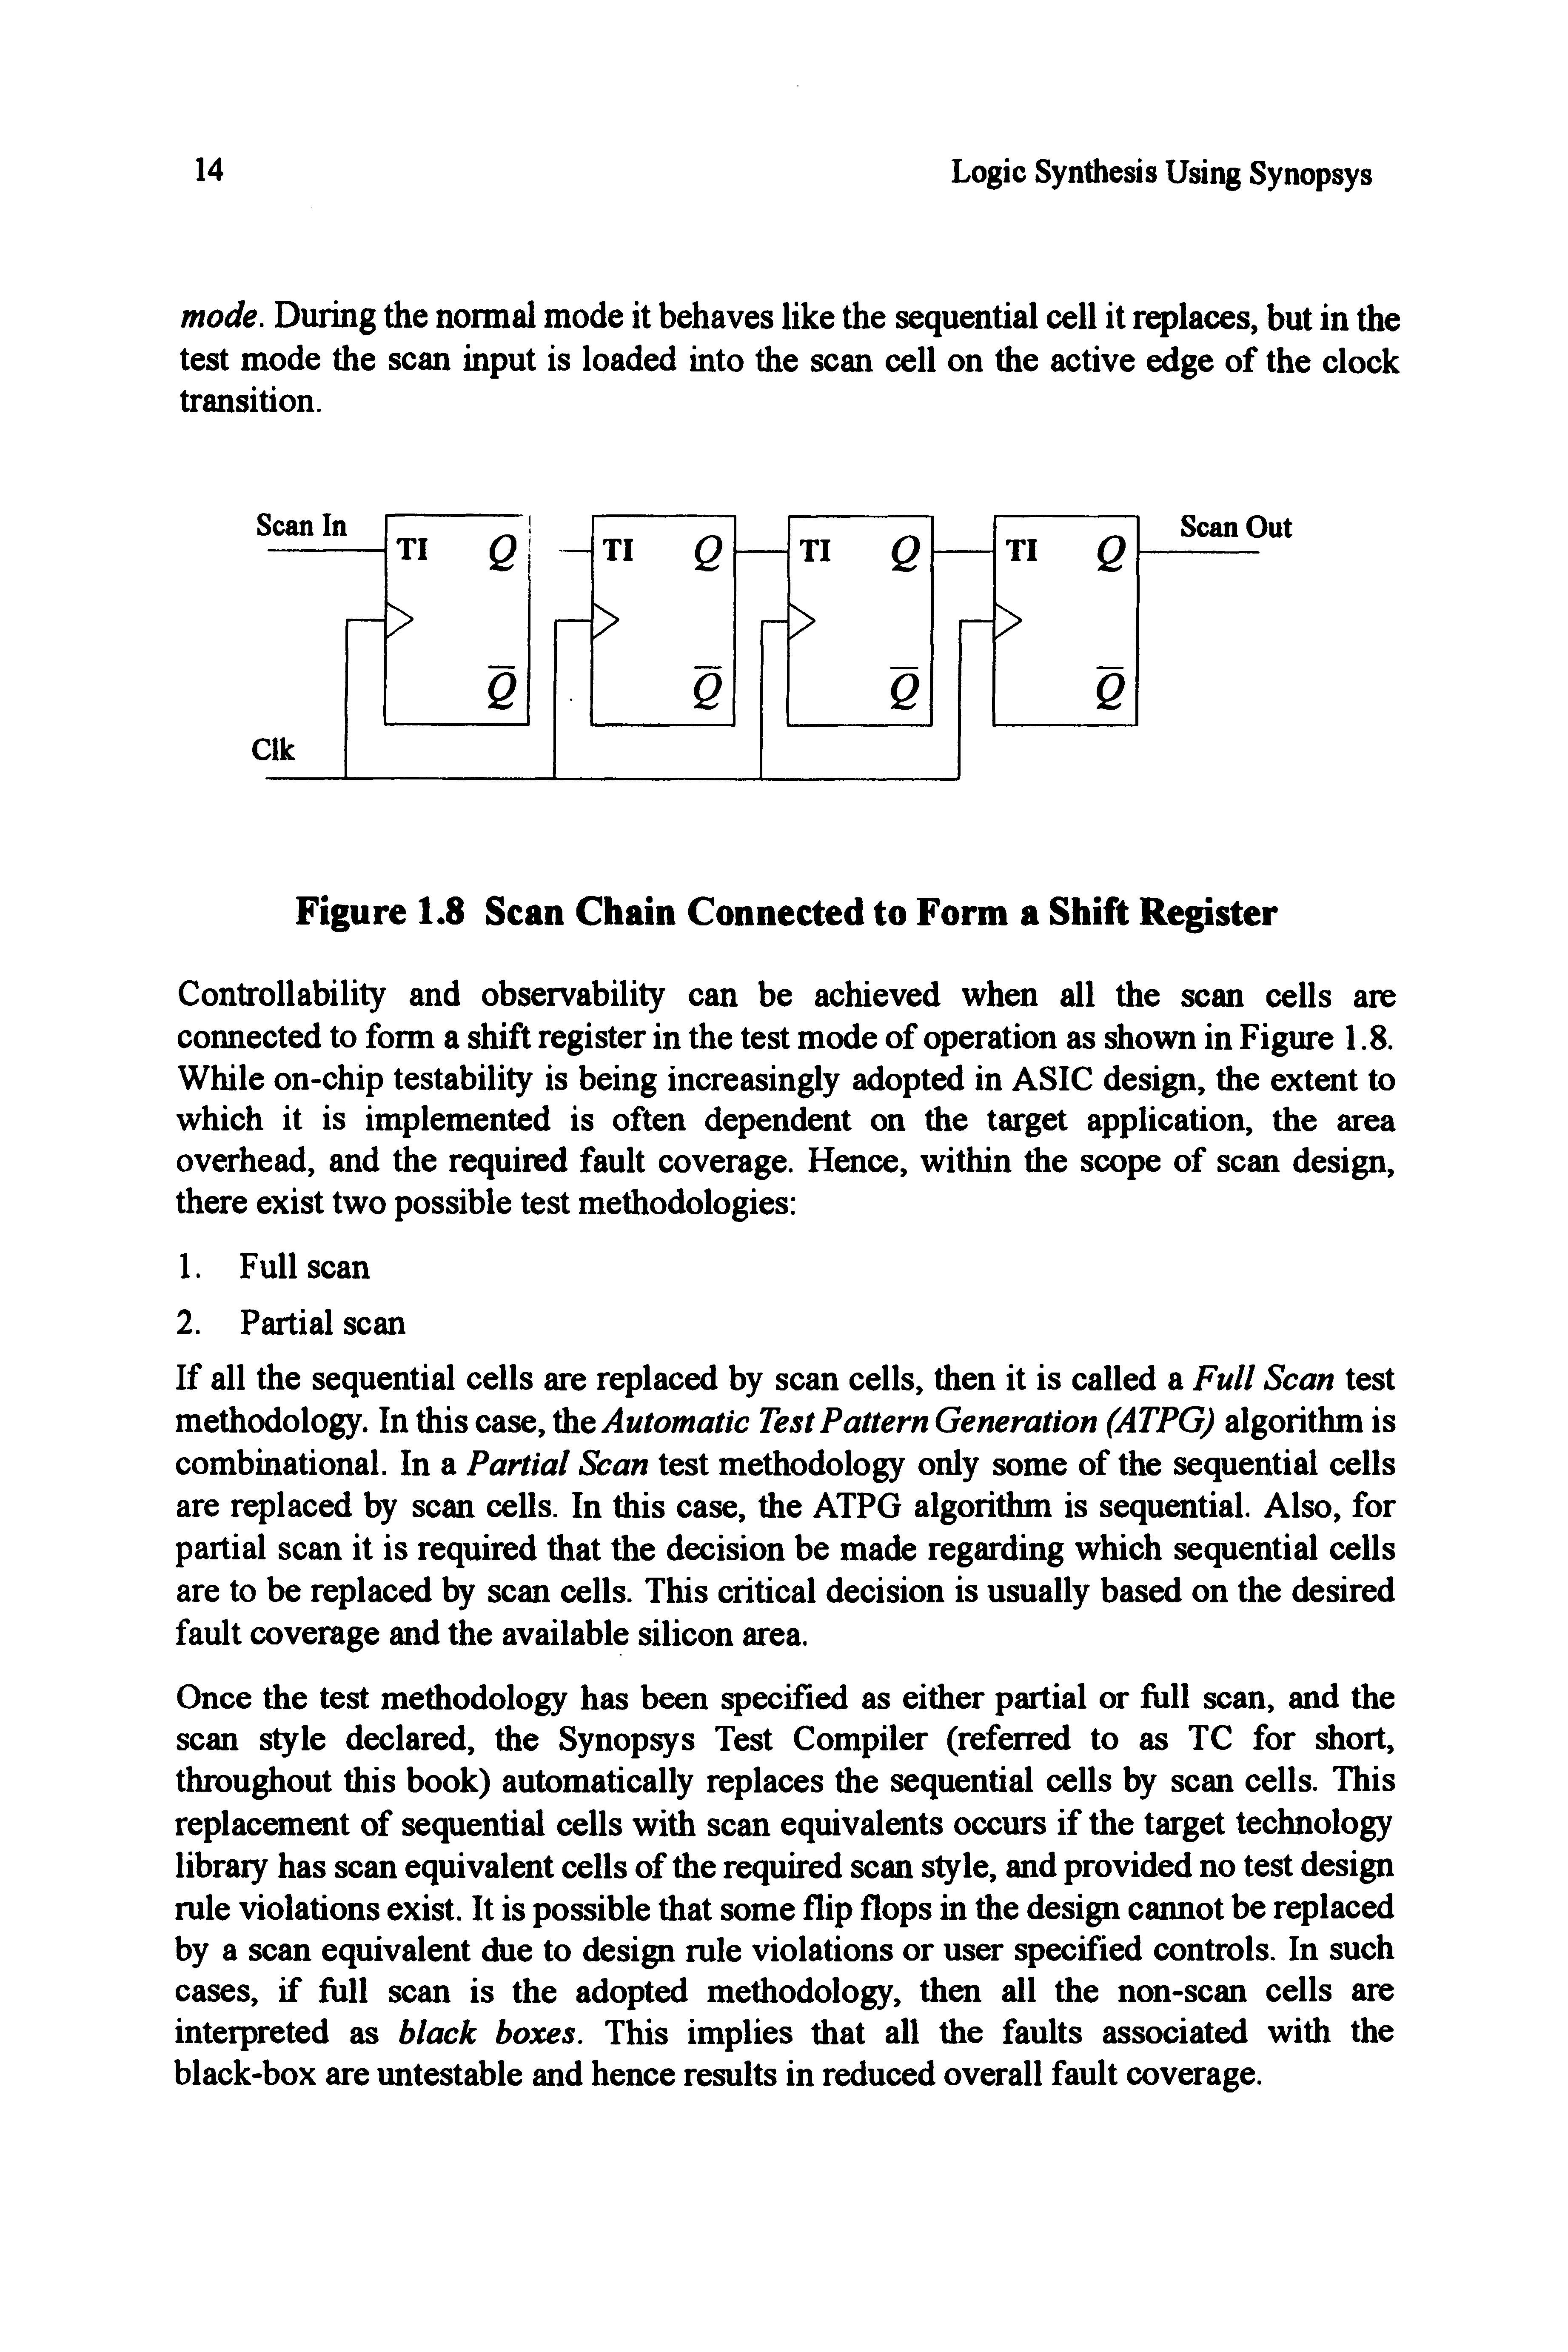 Figure 1.8 Scan Chain Connected to Form a Shift Register...